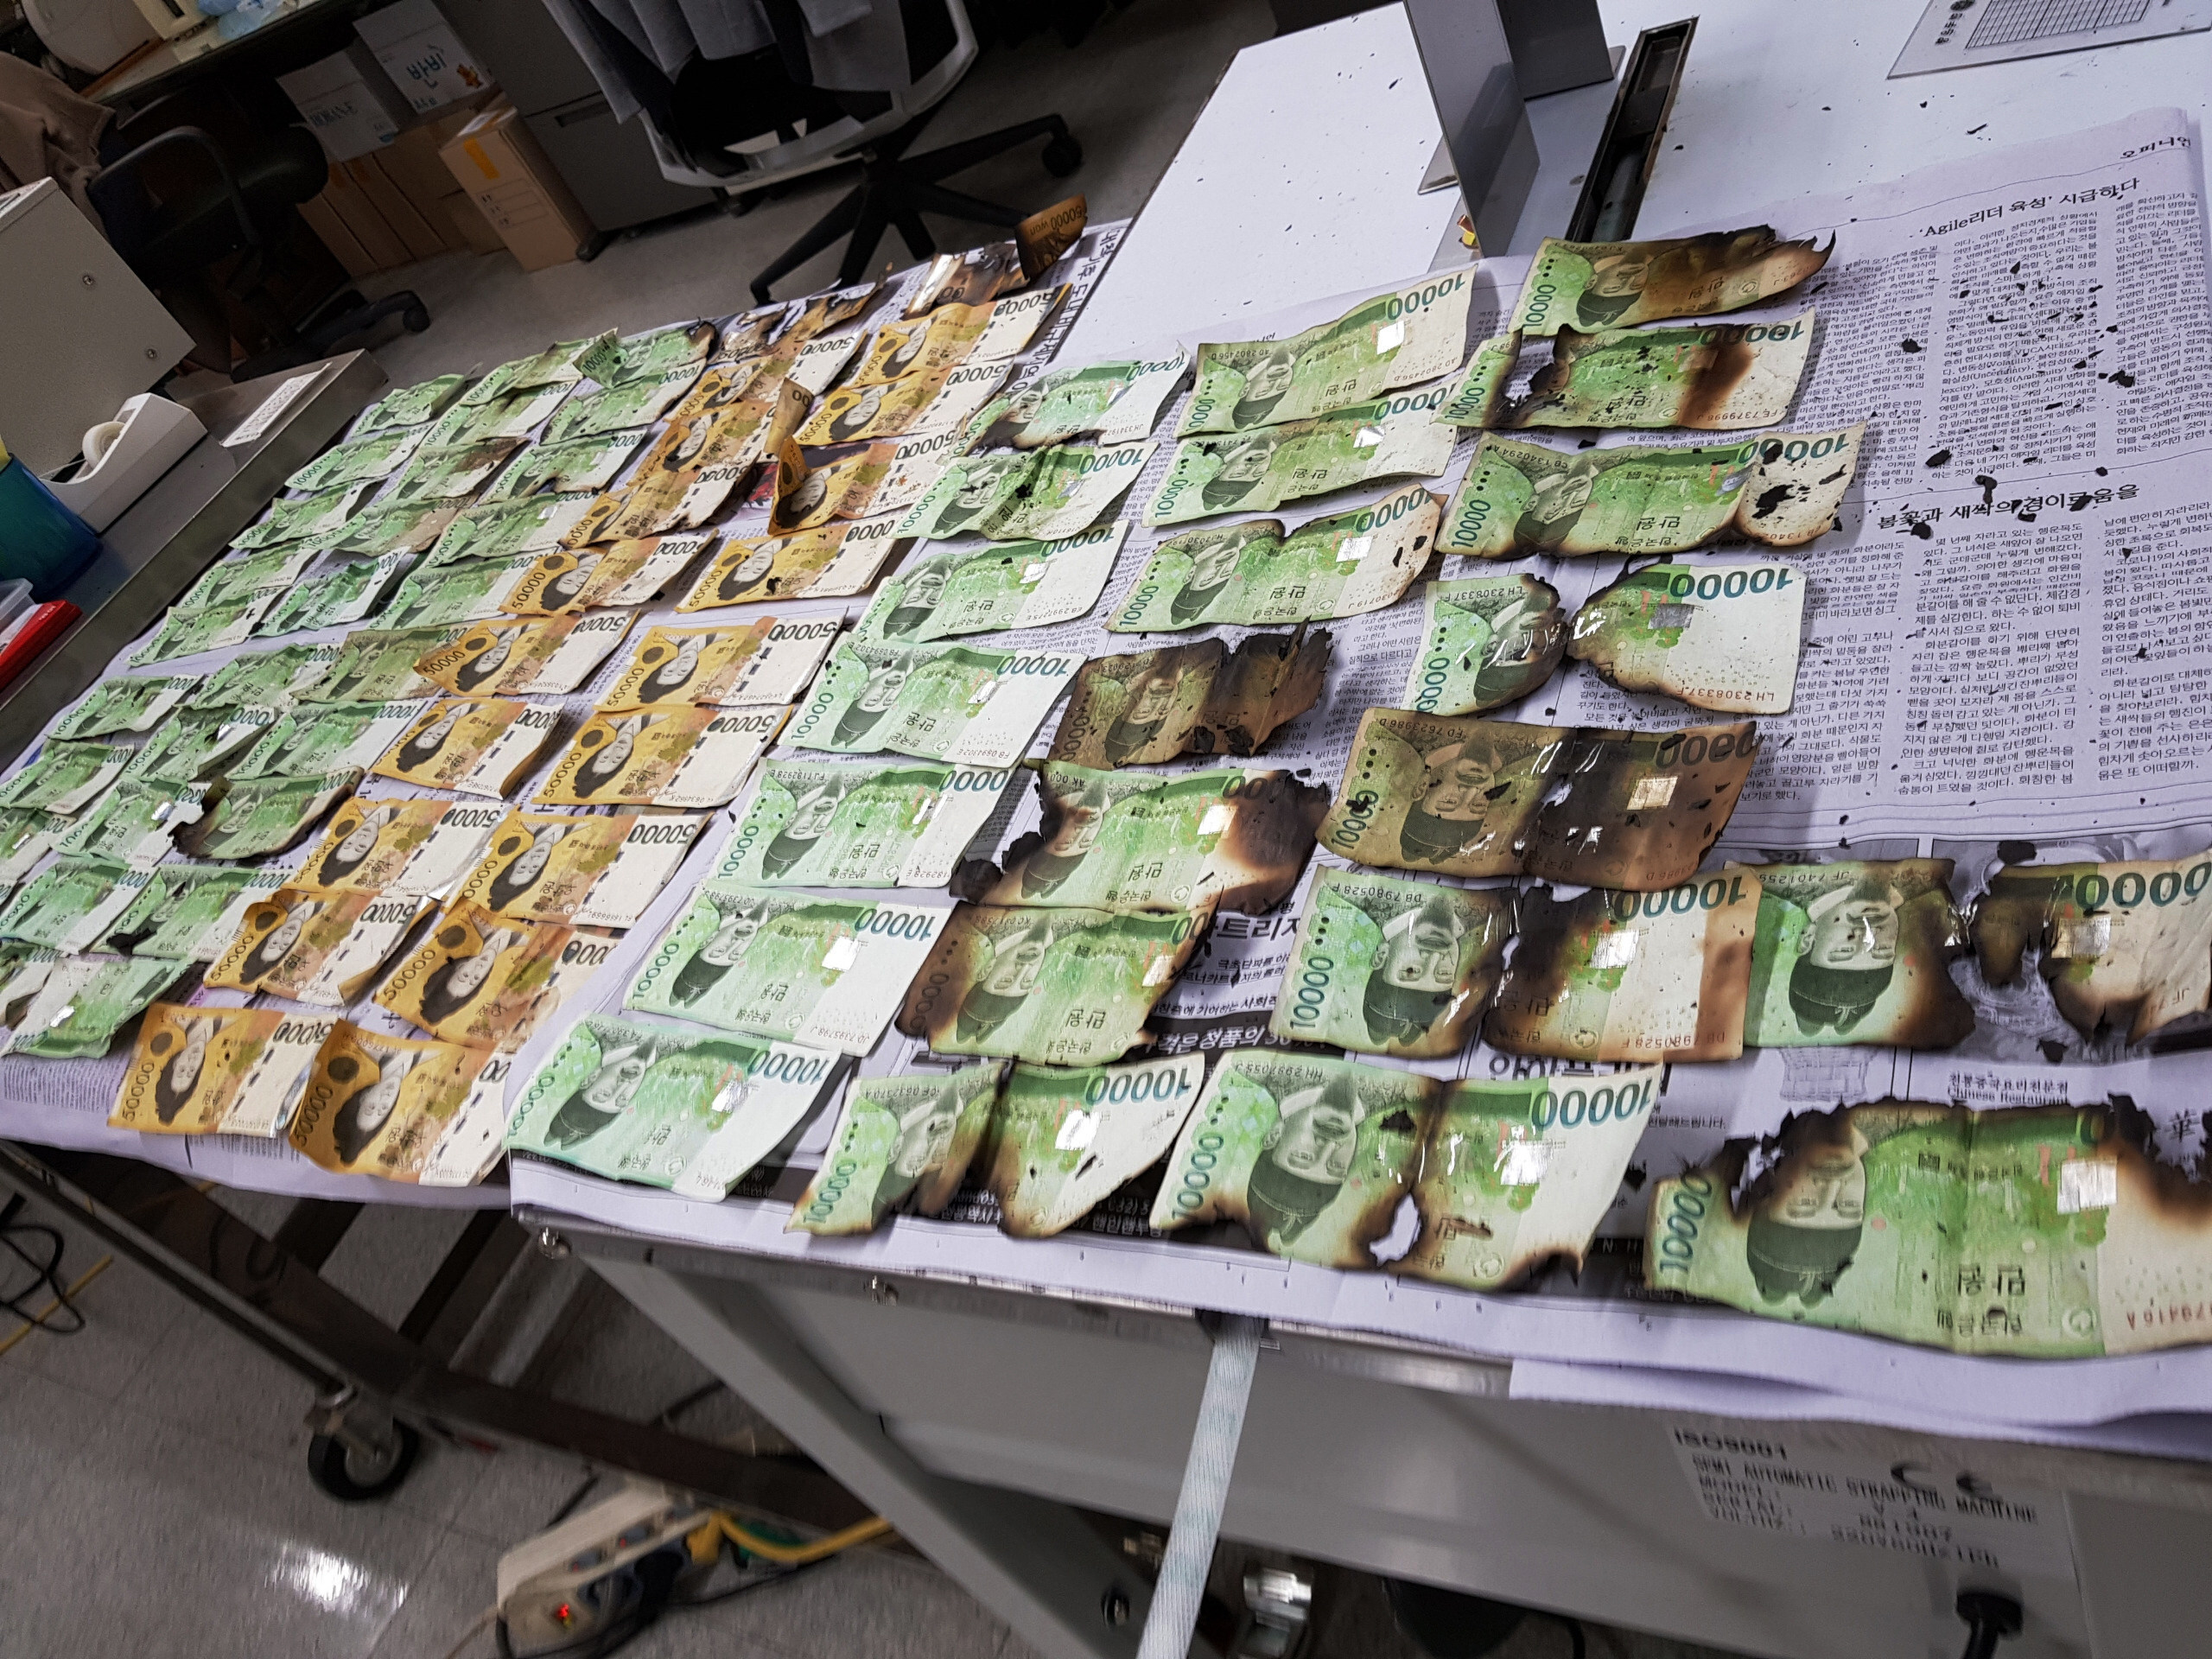 The Bank of Korea displays damaged banknotes that were heated up in a microwave because of concerns over the coronavirus on July 31, 2020. Worries over inflows of hot money have led some central banks in Asia to retract policy support and enact measures to curb rising asset prices. Photo: AP